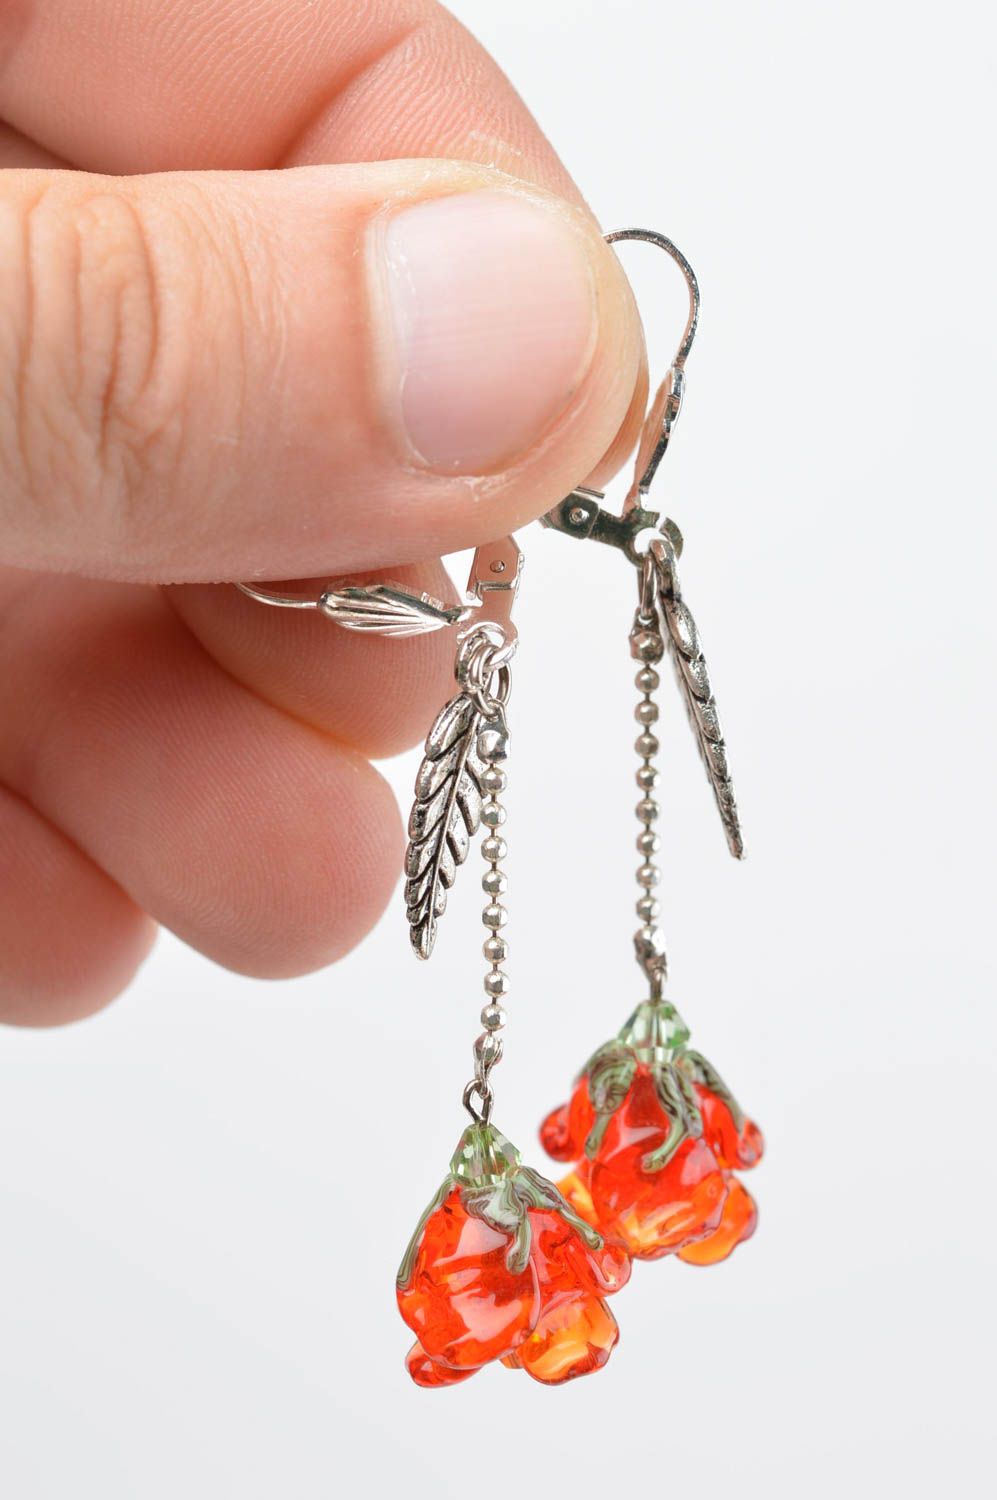 Beautiful handmade glass earrings cool jewelry designs accessories for girls photo 5